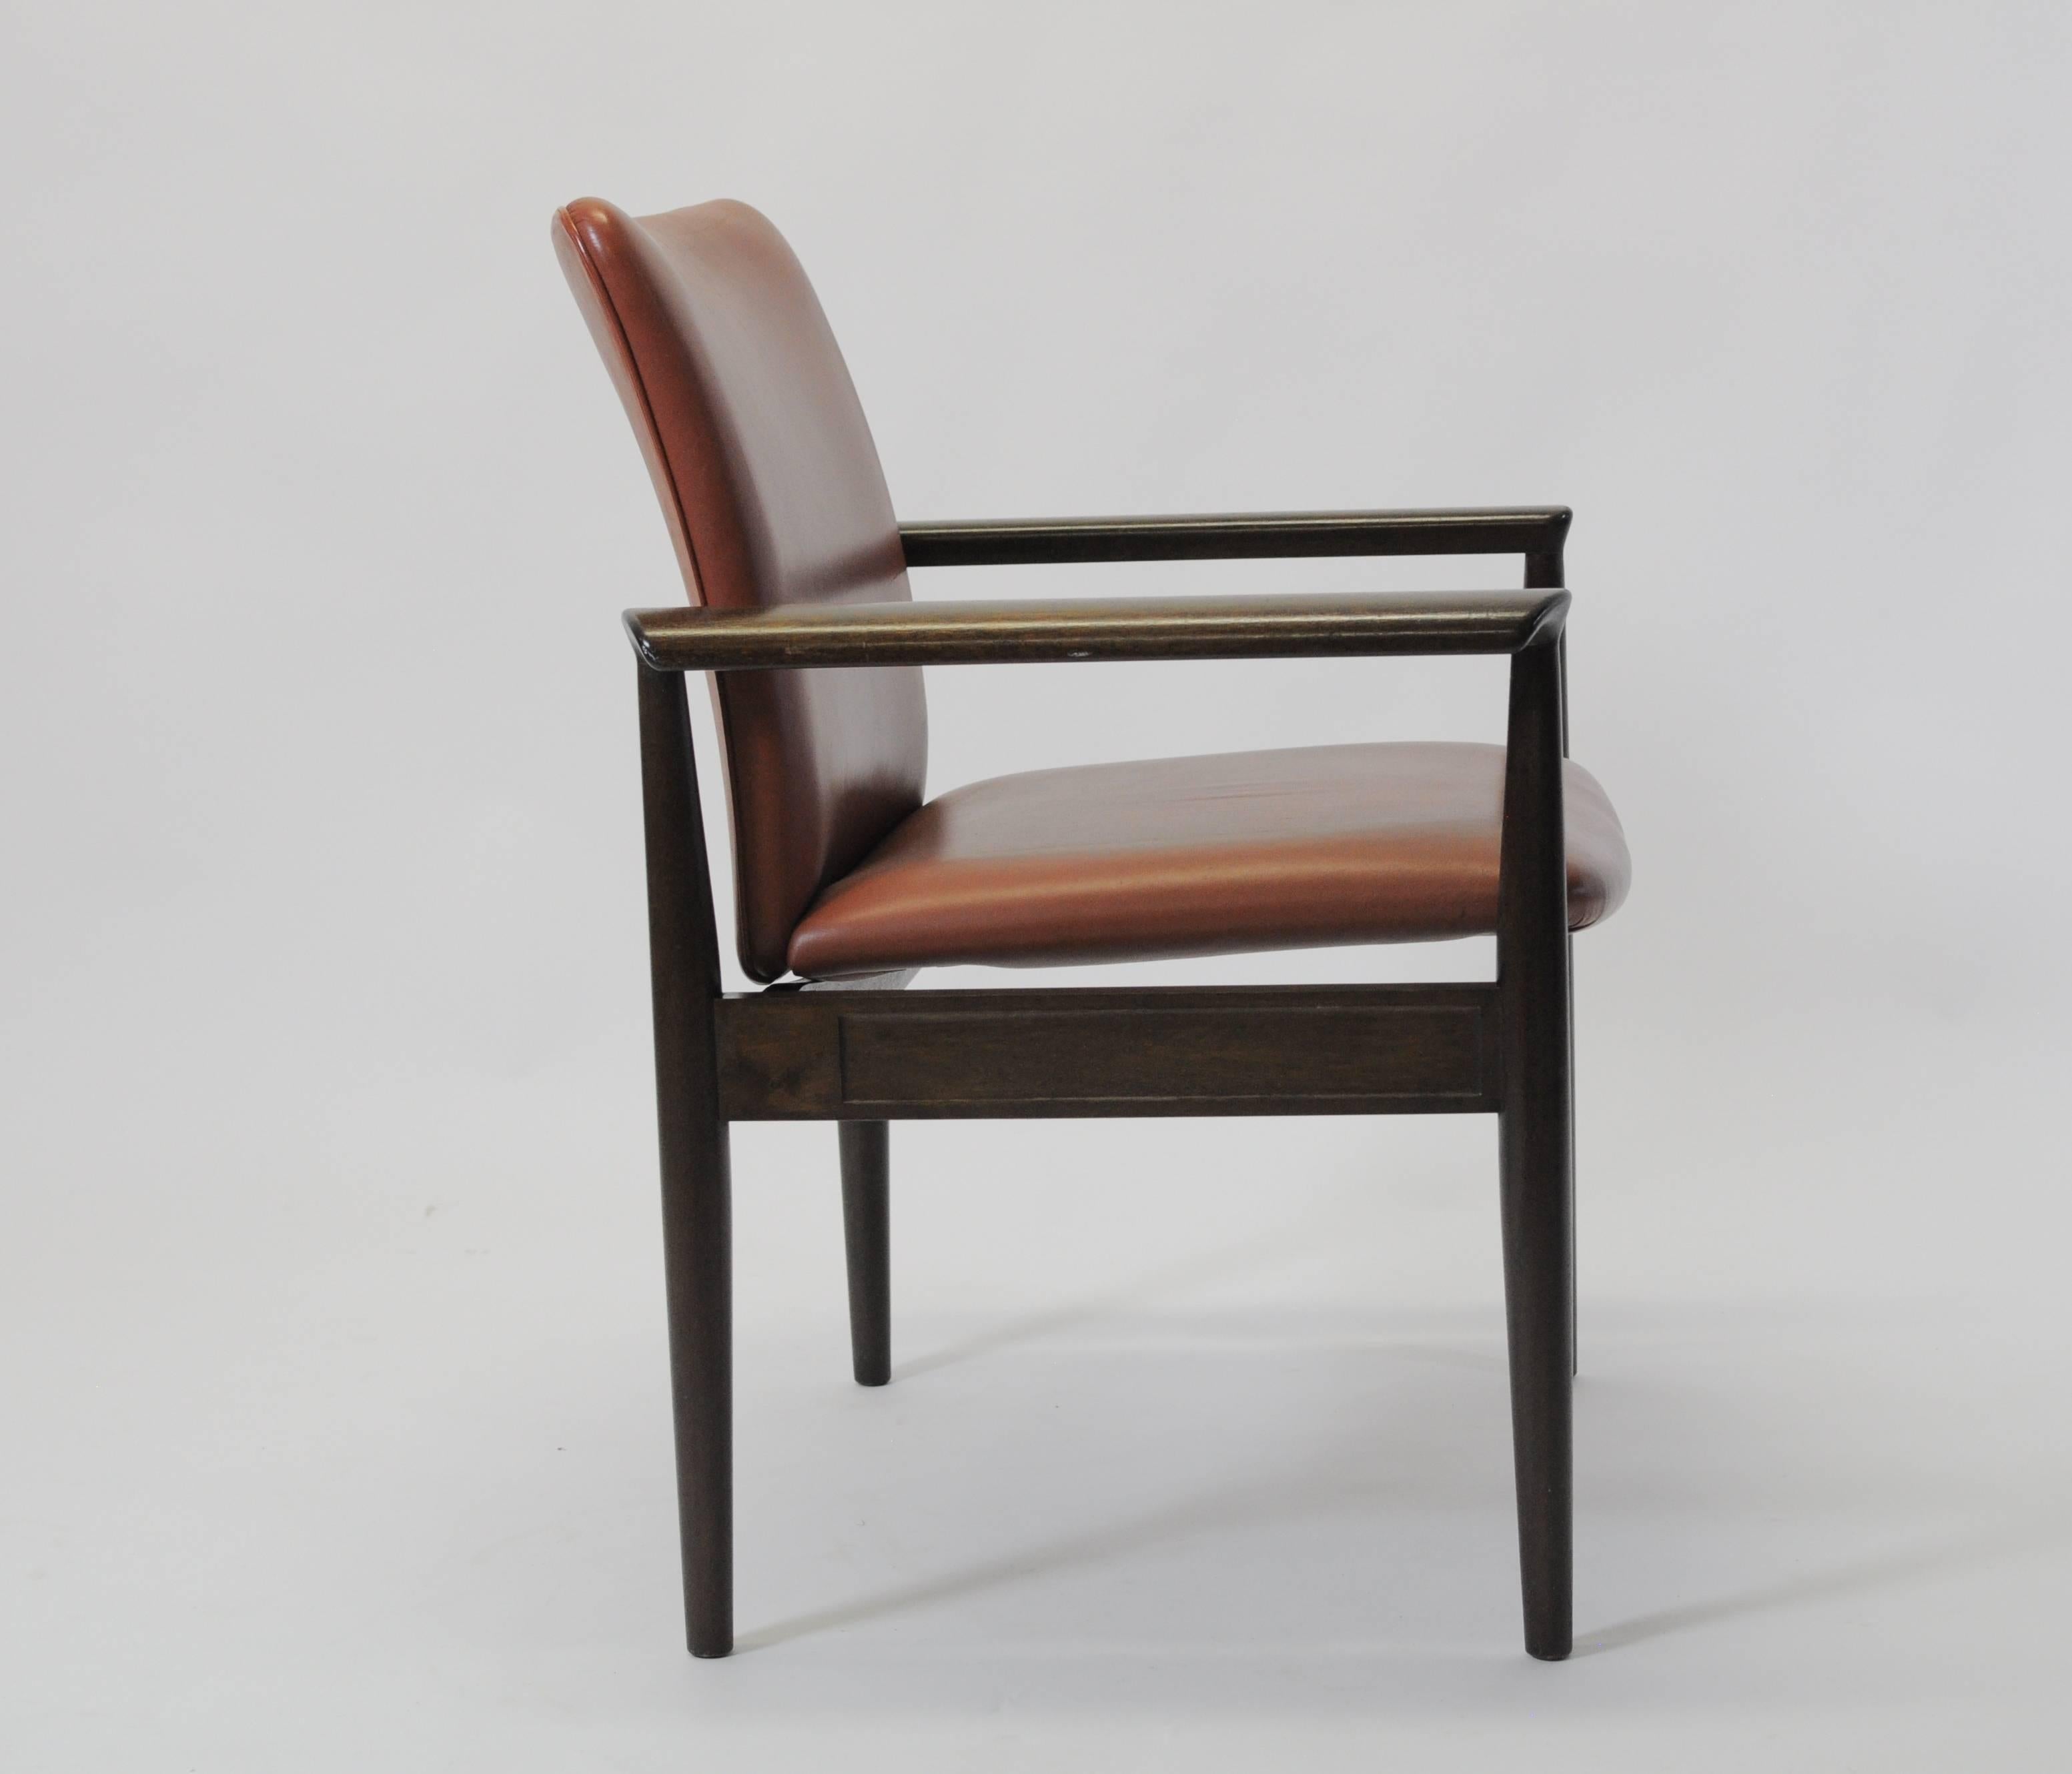 Finn Juhl designed the model 209 chairs in 1961. The model 209 chair is part of a series of furniture named the Diplomat series with chairs, desks, tables, cabinets and other furniture.

The chairs features mahogany frames and brown leather